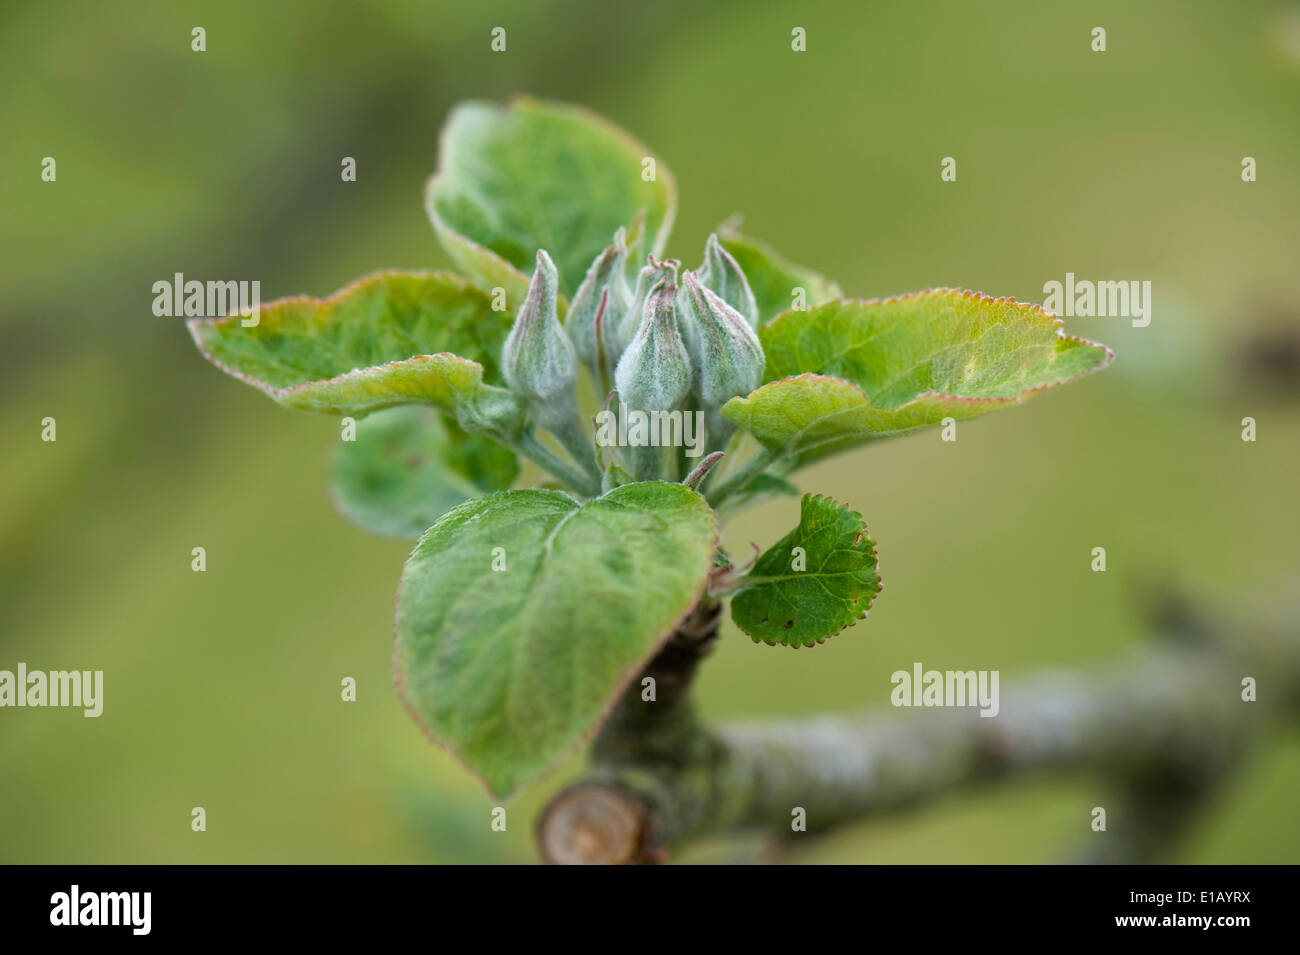 Green tight flower buds and a young leaf rosette on an apple tree in spring Stock Photo